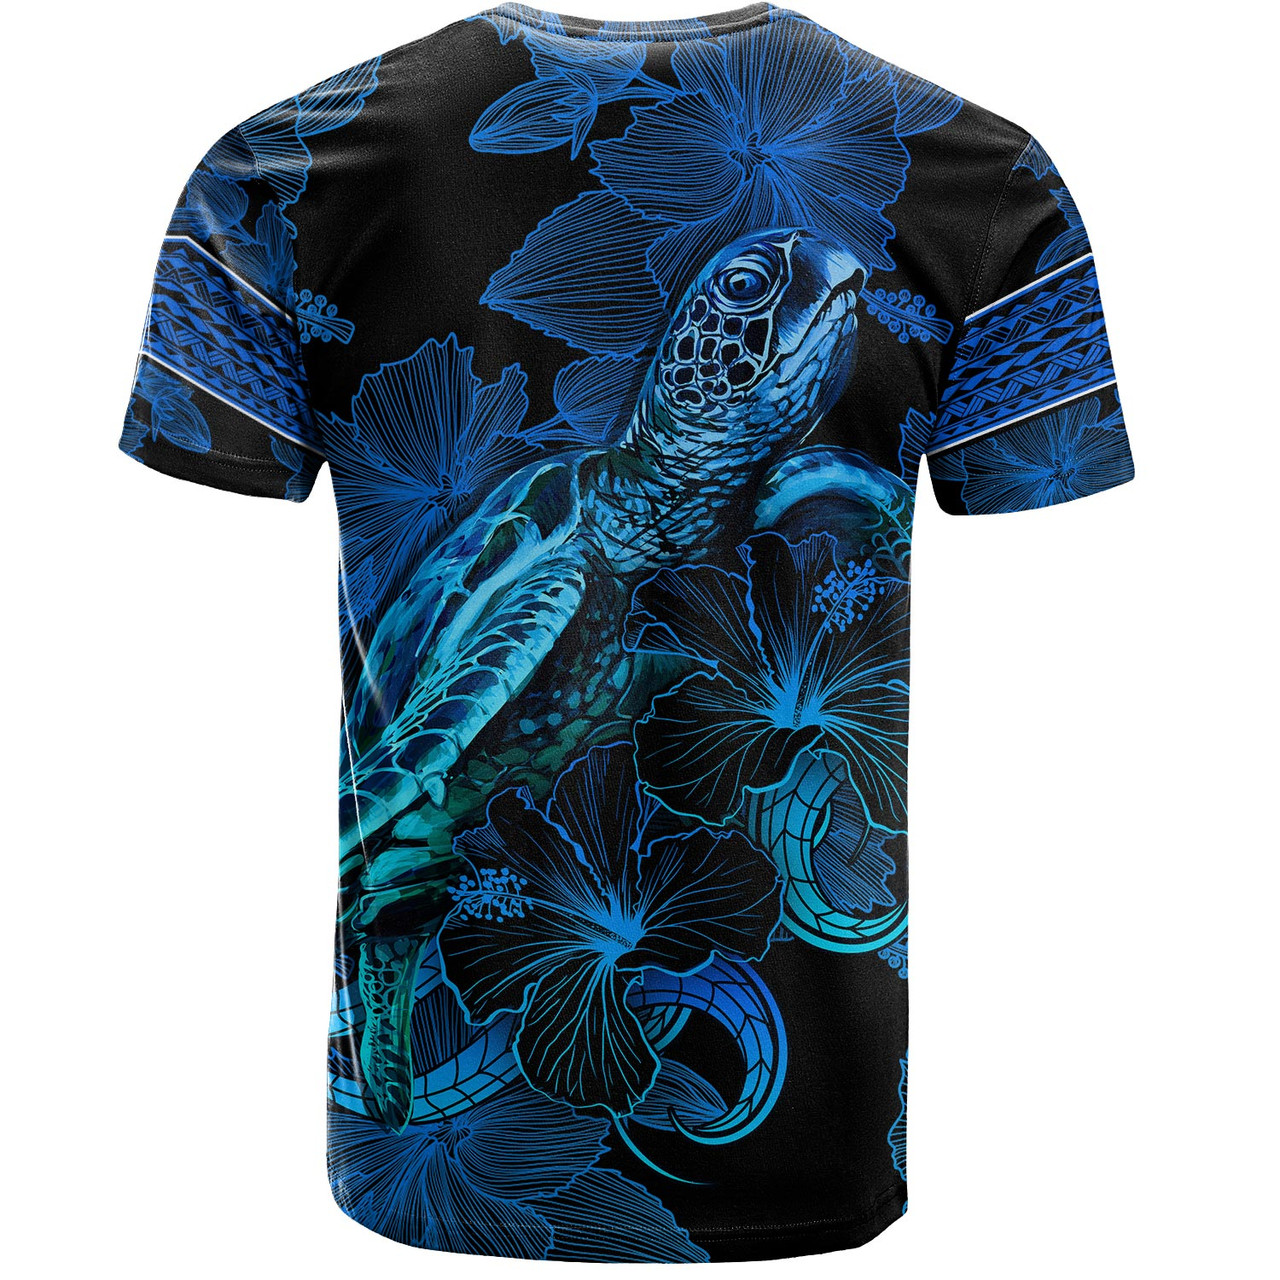 Palau T-Shirt Sea Turtle With Blooming Hibiscus Flowers Tribal Blue